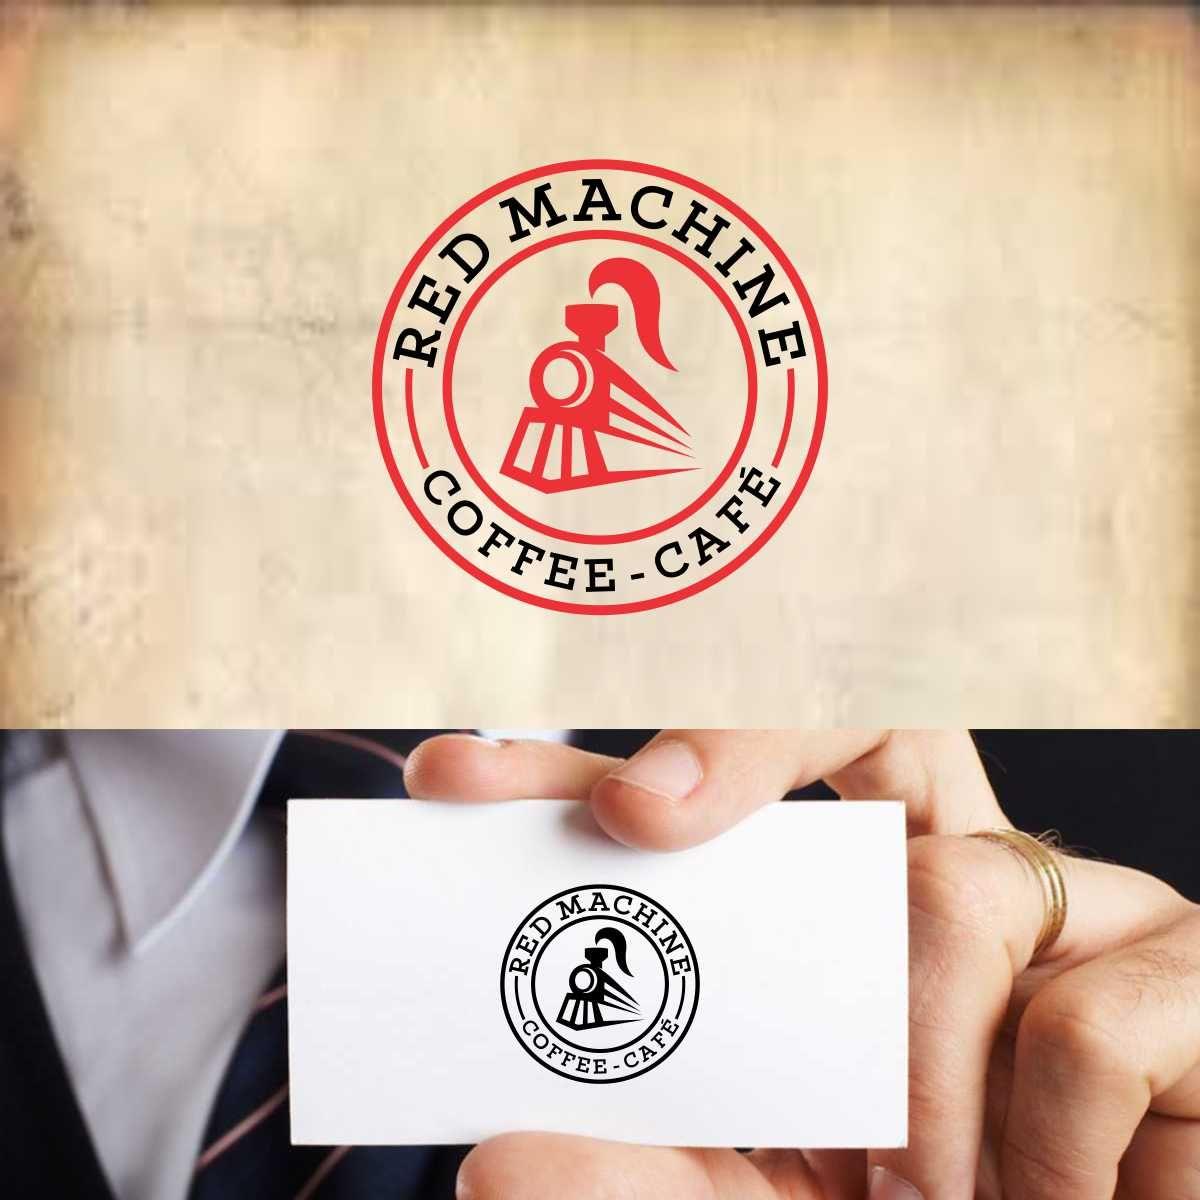 Red Coffee Shop Logo - Masculine, Serious, Coffee Shop Logo Design for Red Machine Coffee